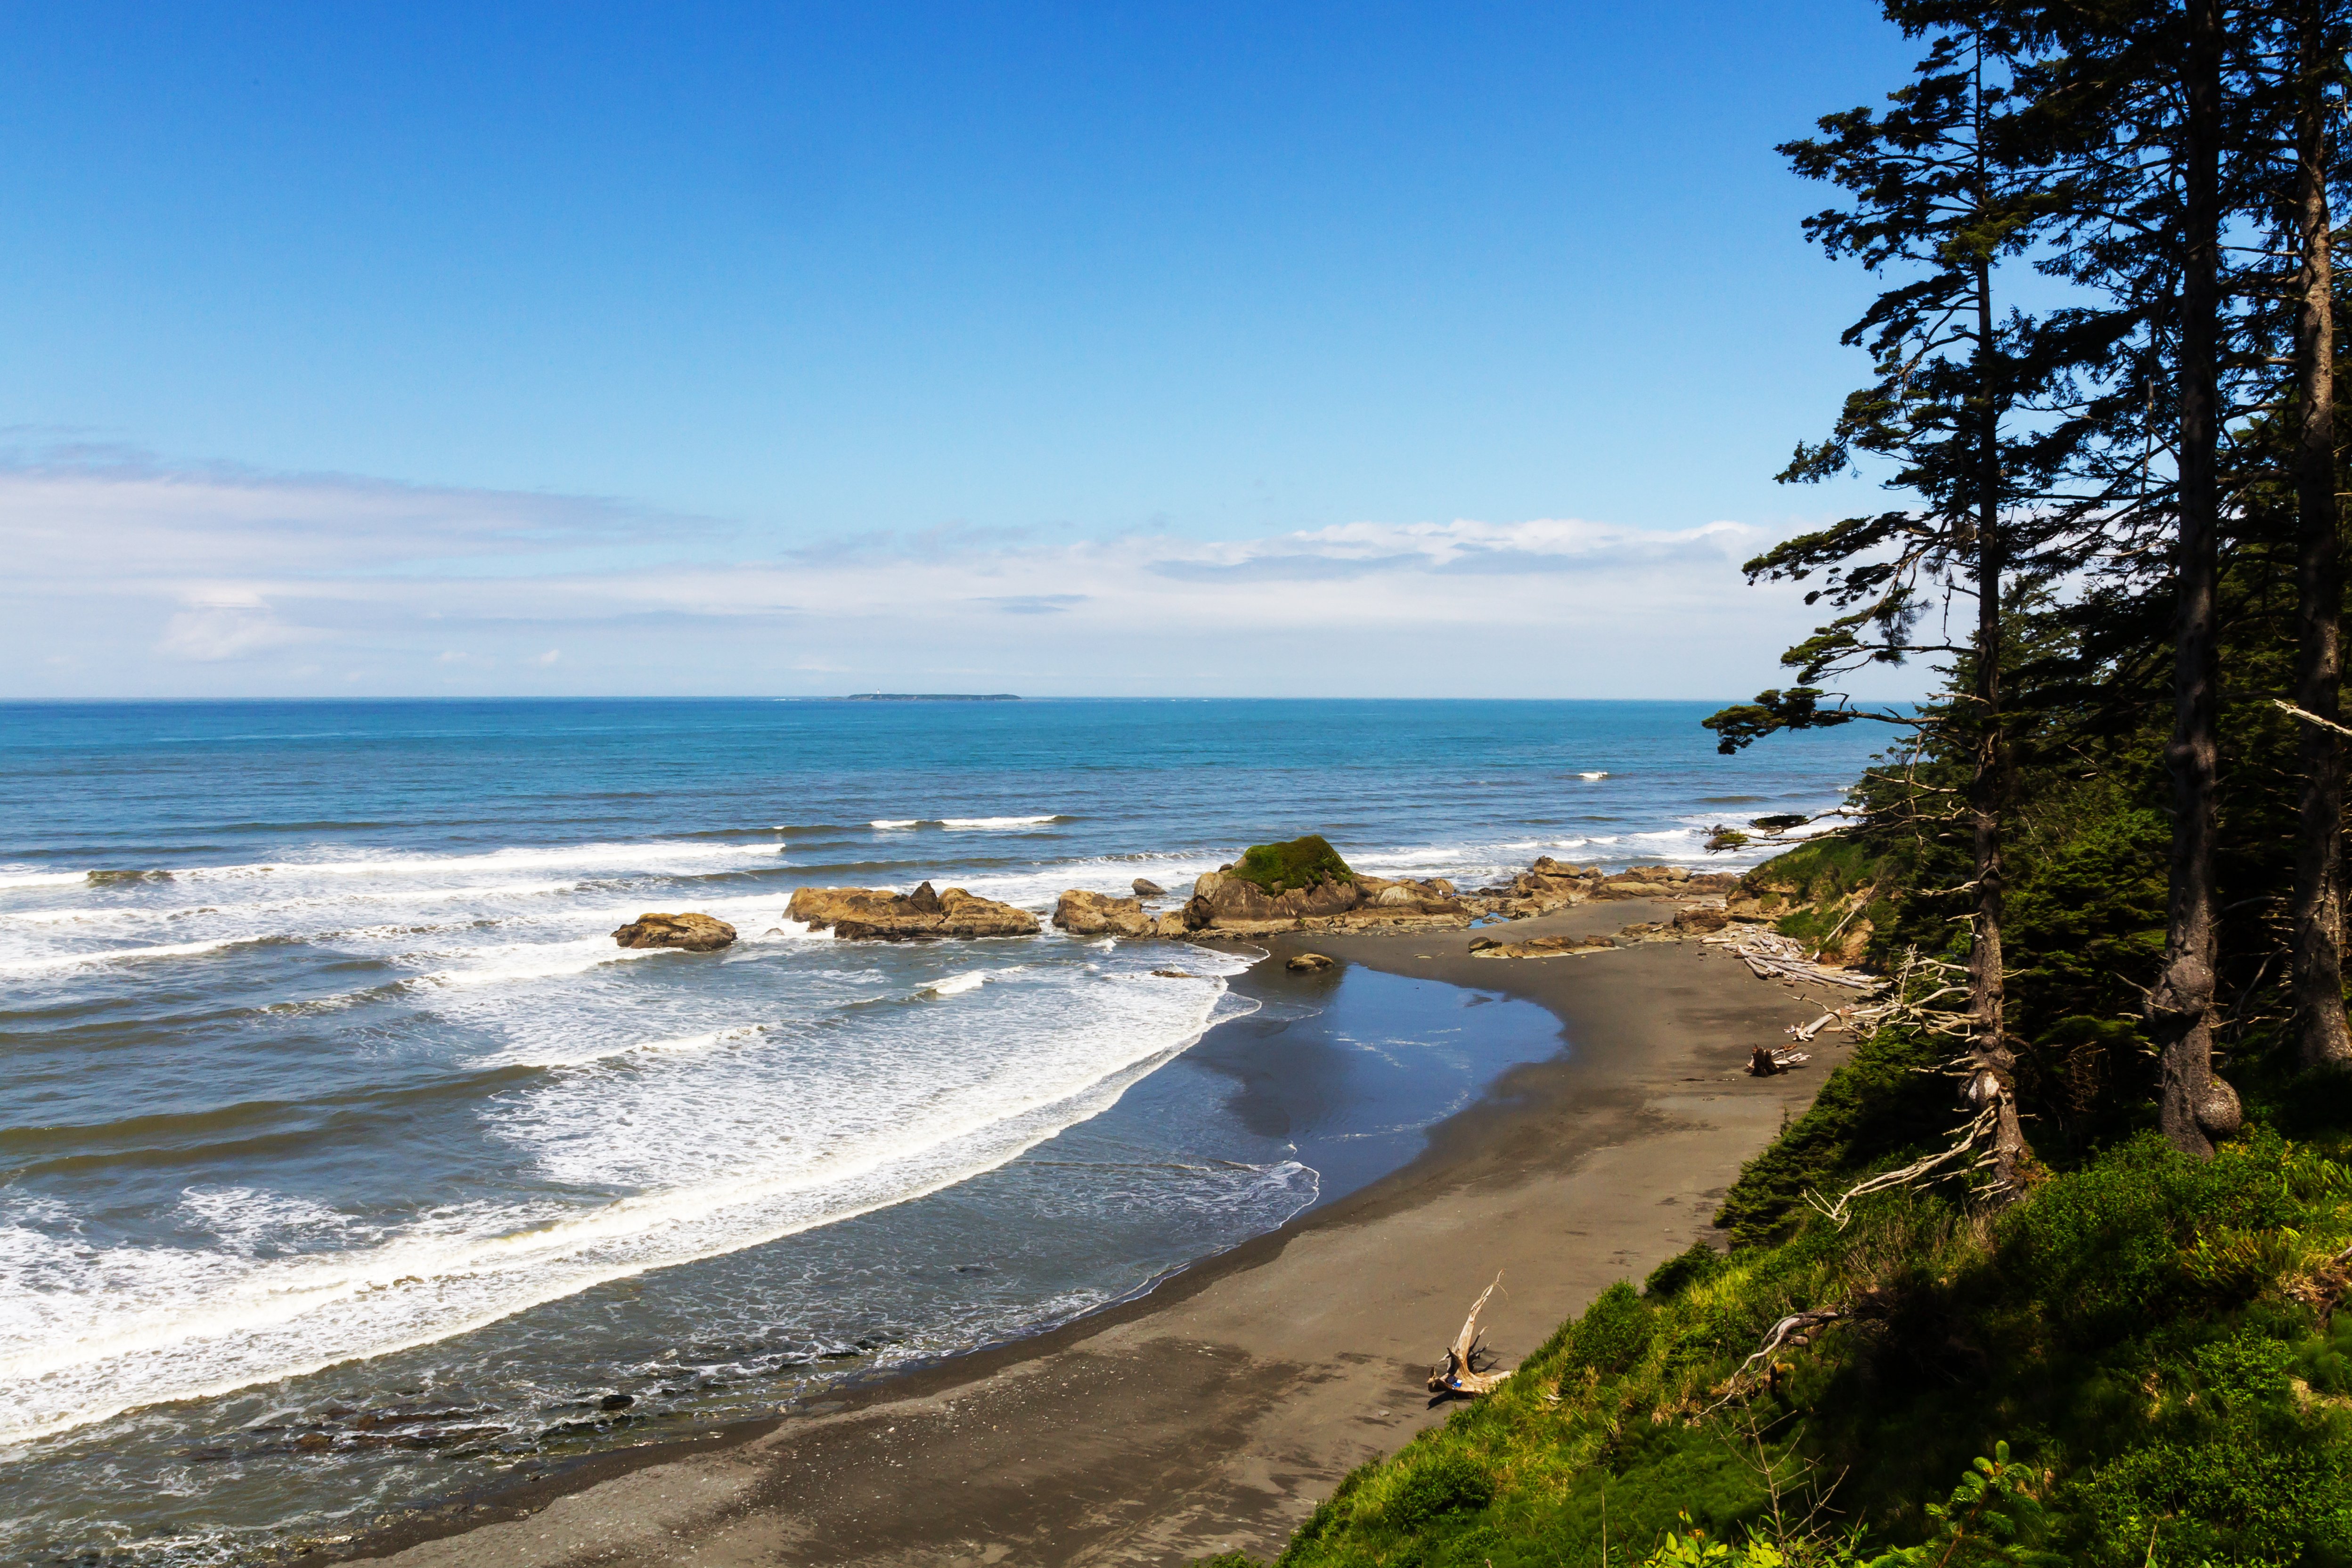 A sunny coastal view of a beach with waves breaking near shoreline pine trees